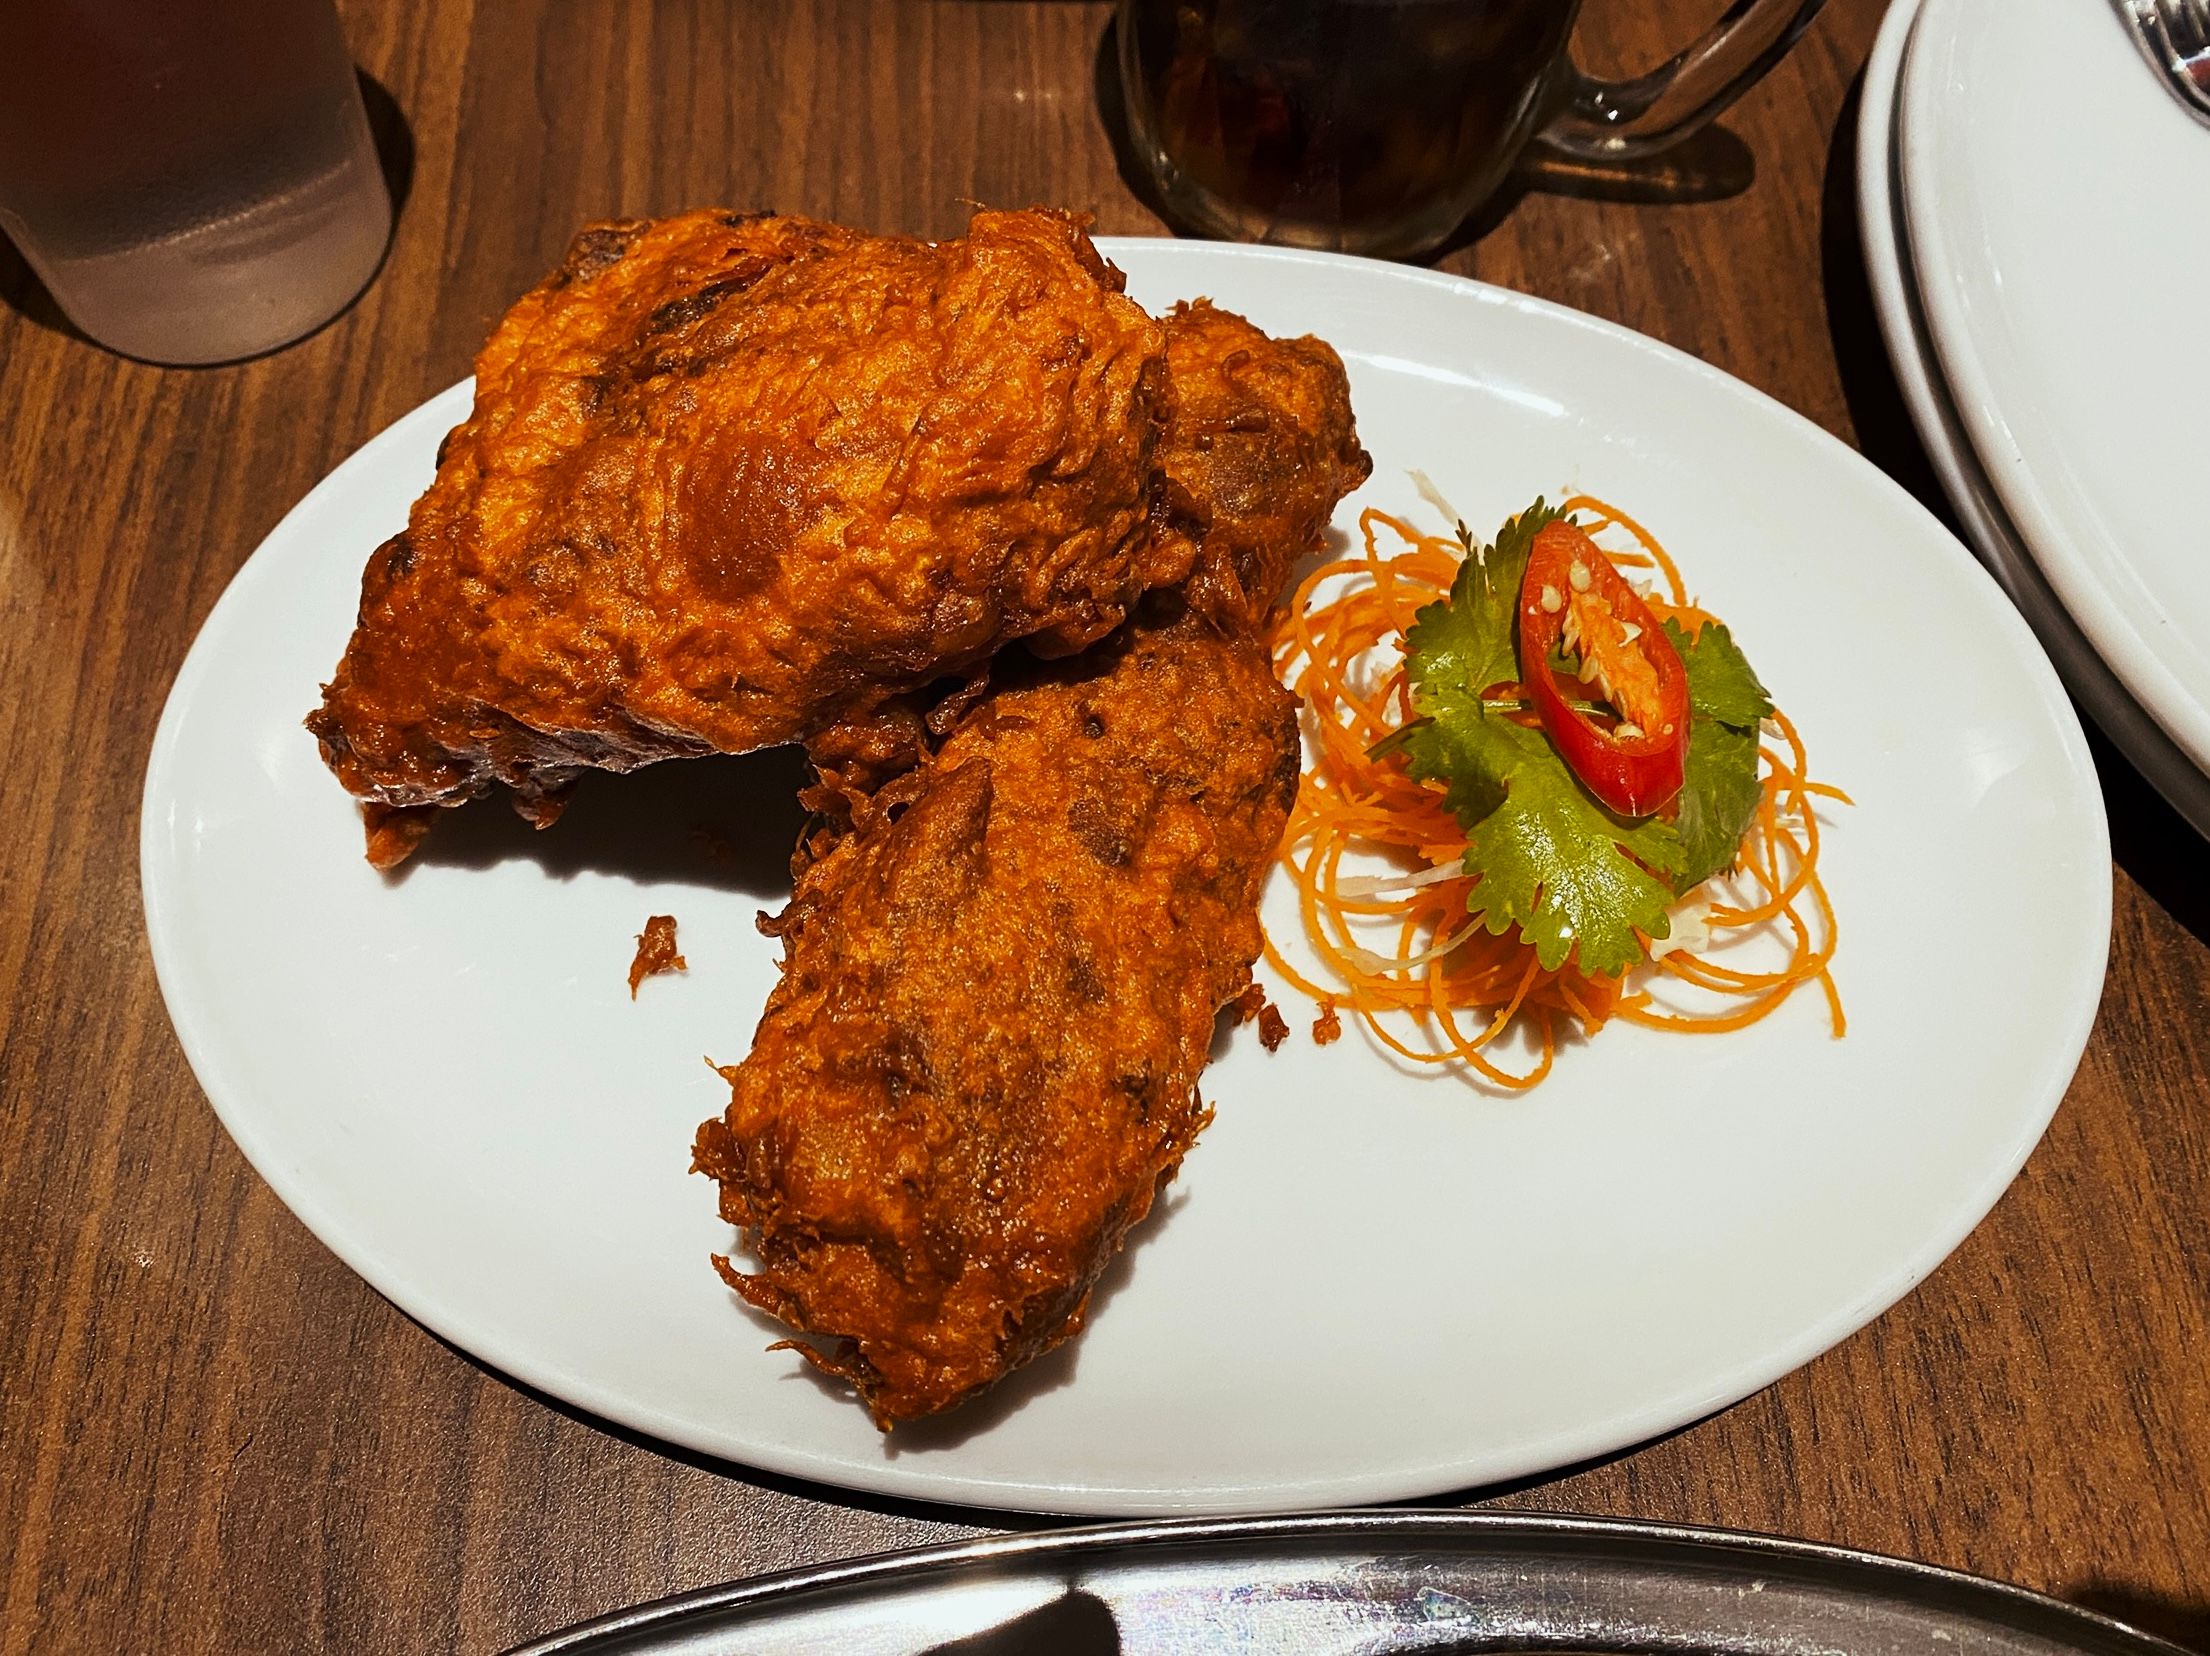 A photo of two pieces of fried chicken on a plate. They're a rich dark red/brown colour.